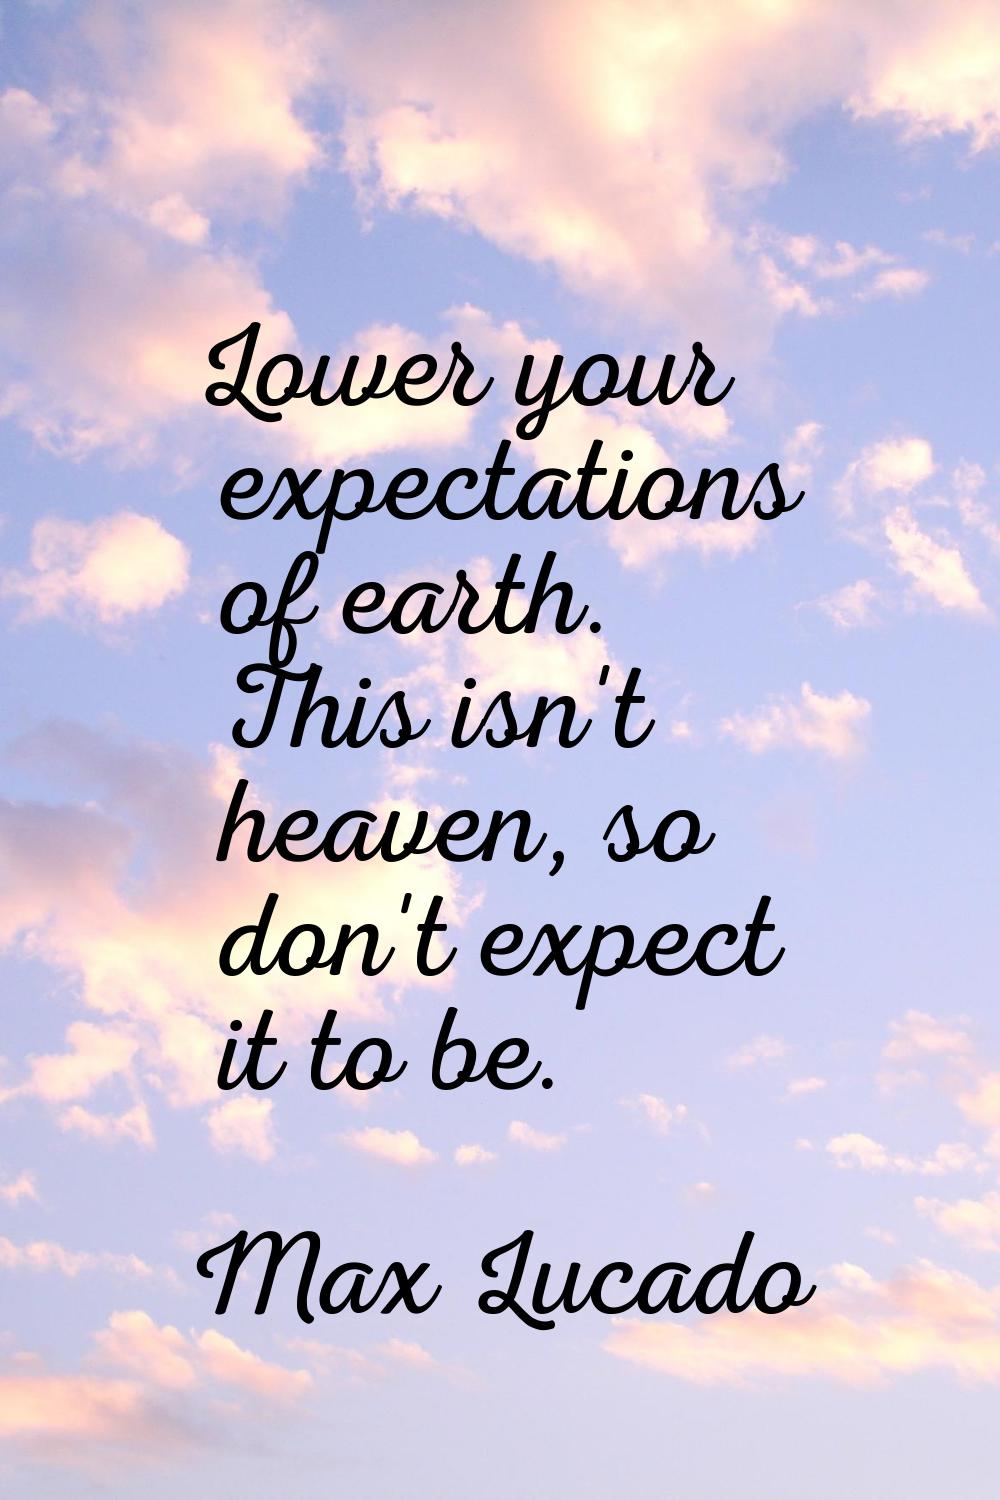 Lower your expectations of earth. This isn't heaven, so don't expect it to be.